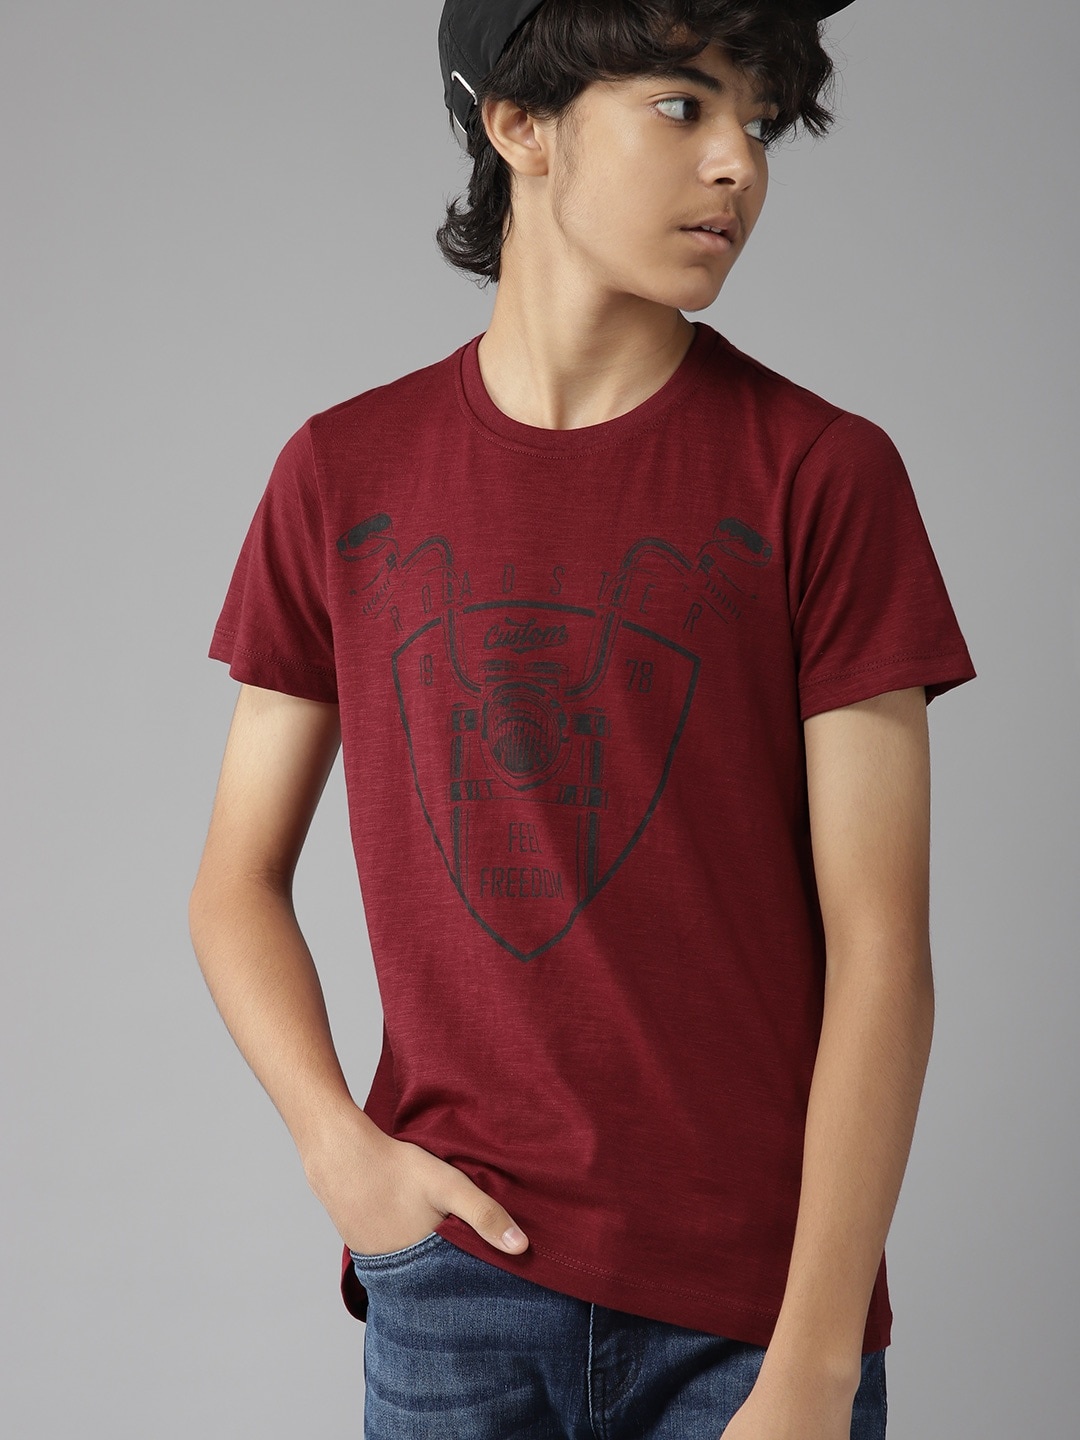 

UTH by Roadster Boys Burgundy & Black Graphic Printed Cotton T-shirt